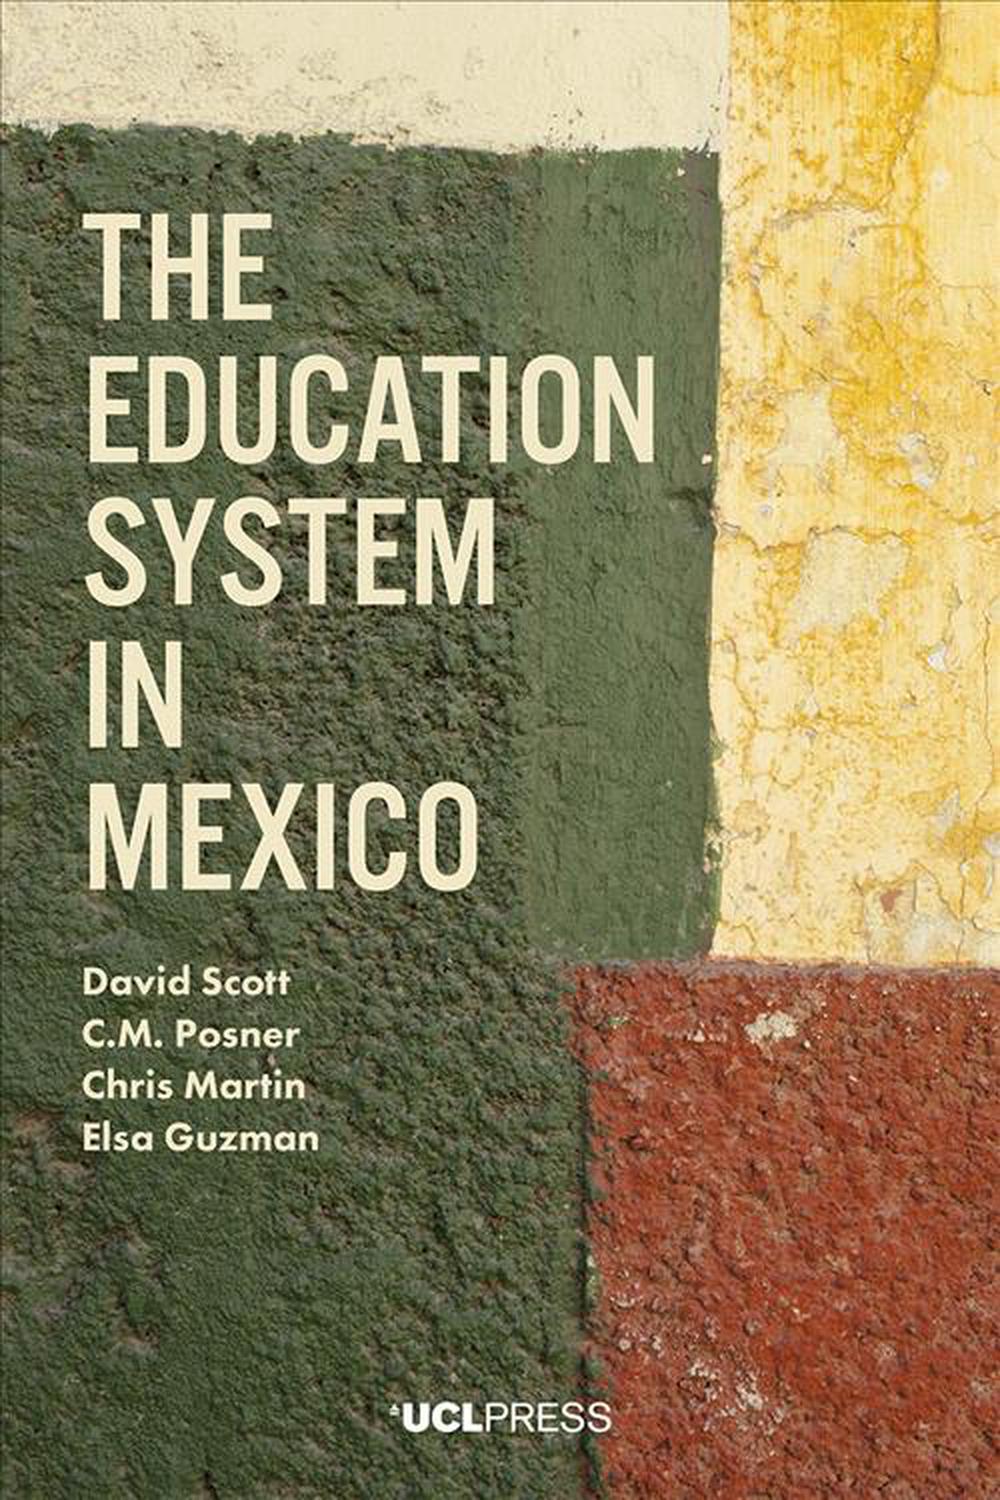 articles about education in mexico